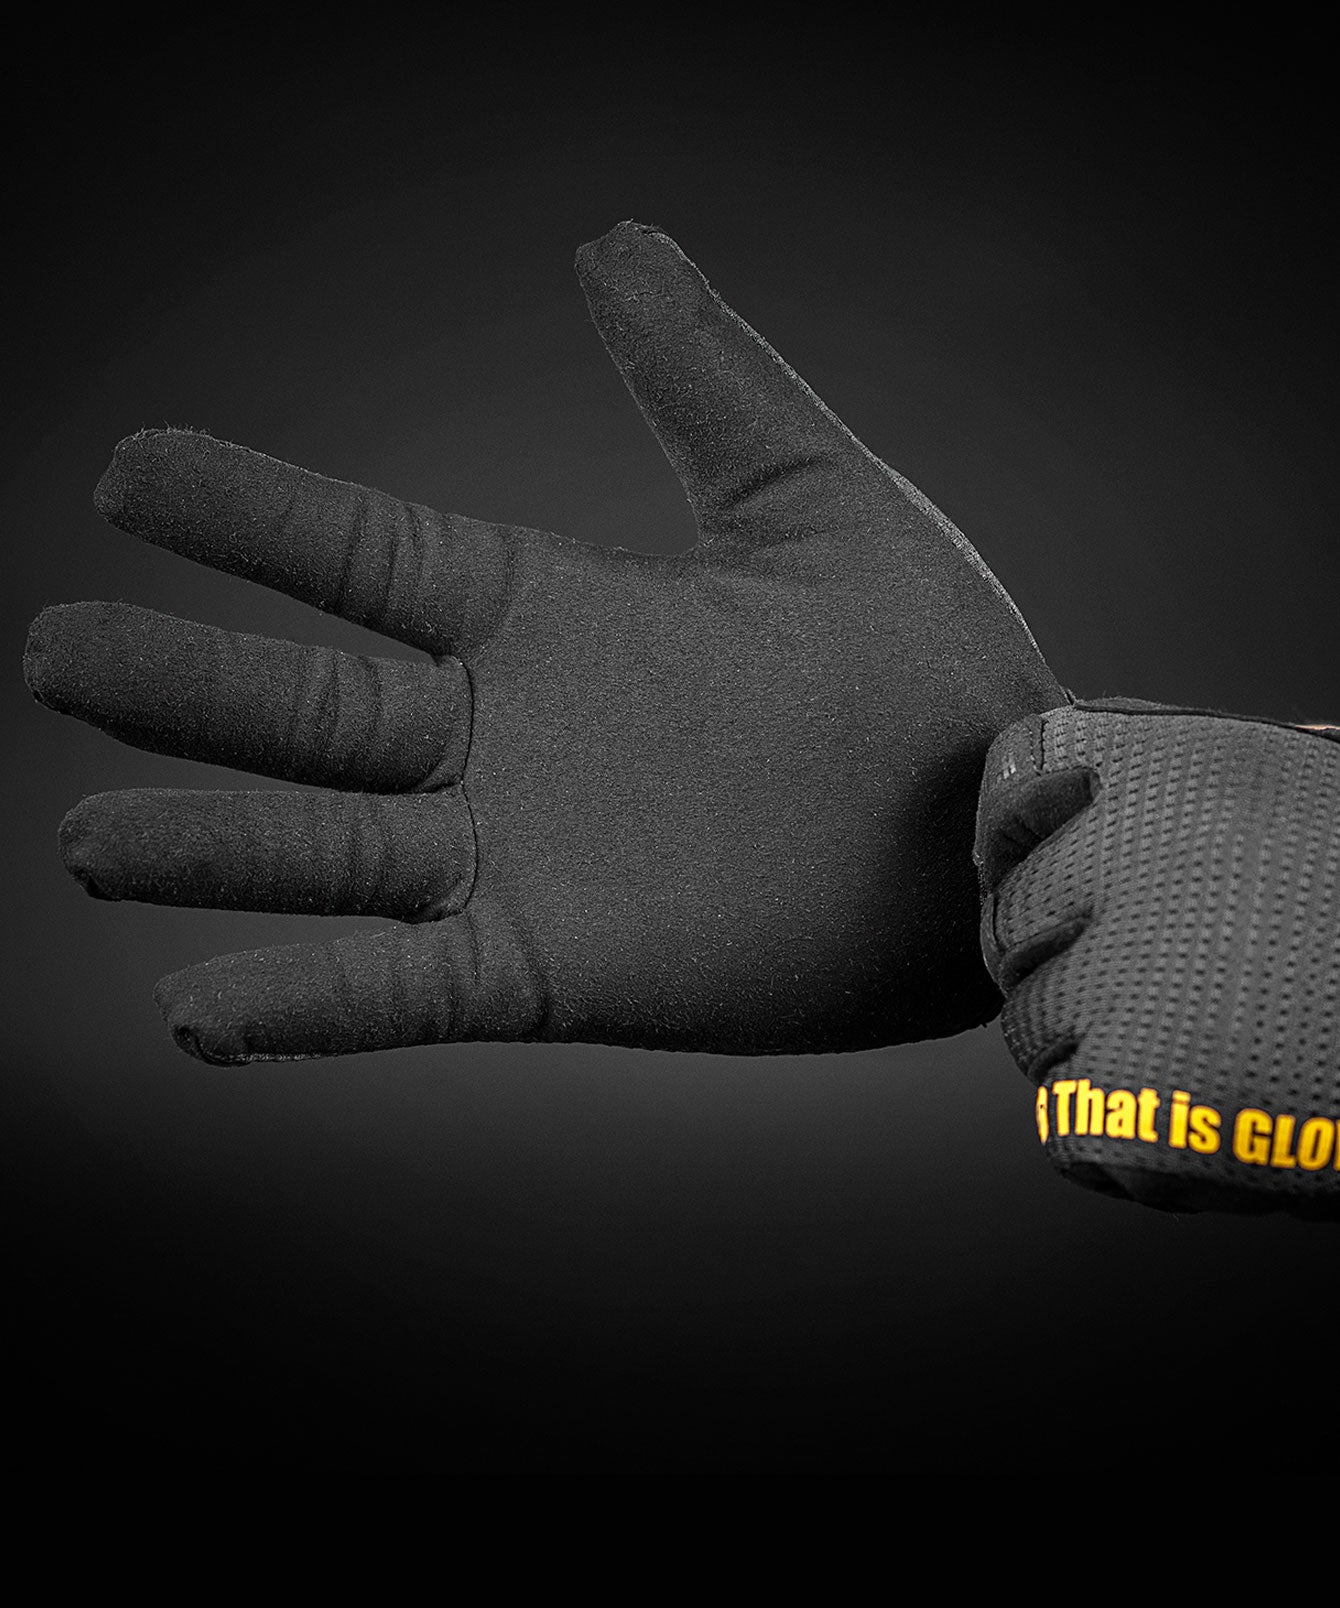 ControllerUltra Work Gloves - Ultra Durable, Stable Performance, 2Way Touch, BadgeFlex for Add-on Badges, Black